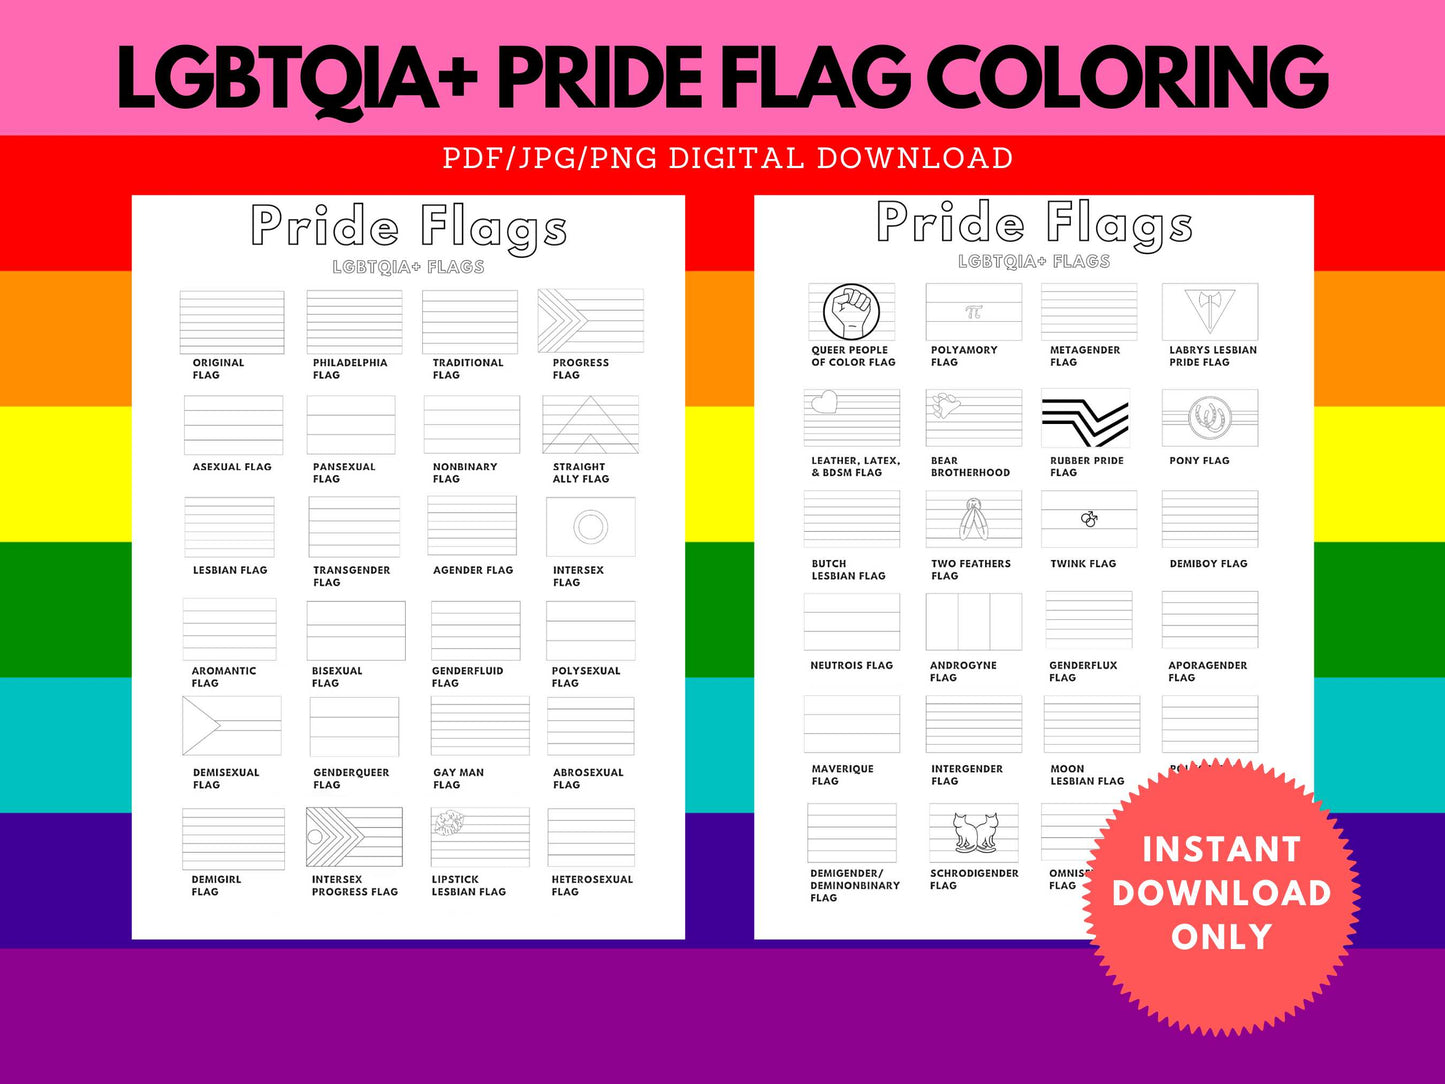 LGBTQIA+ Pride Flags Coloring Pages | Education Printable | LGBTQ Flag | LGBT Gift | Instant Download 4 Files